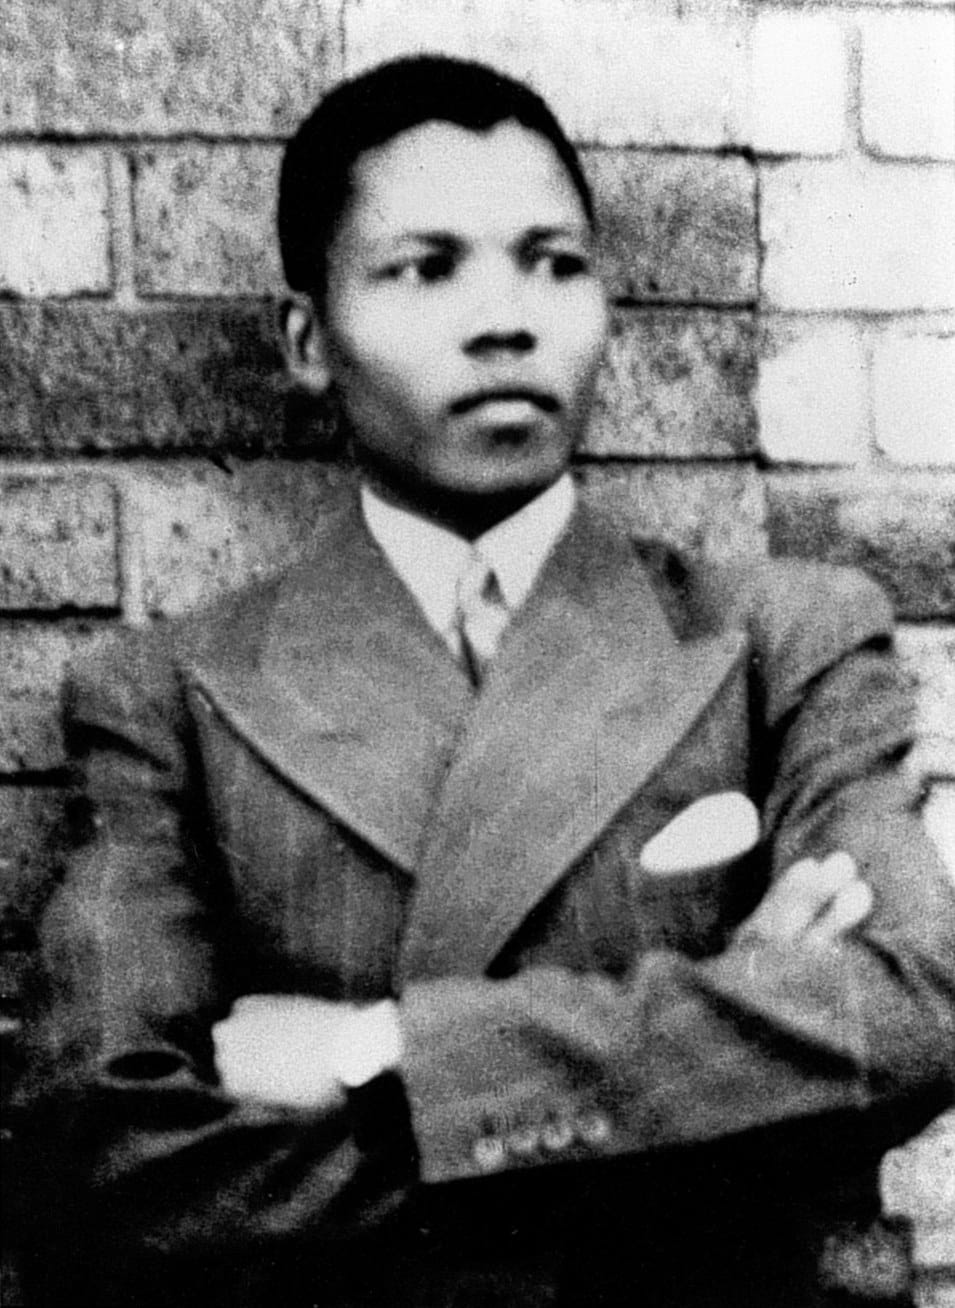 Biography of Nelson Mandela - A picture of young Nelson Mandela